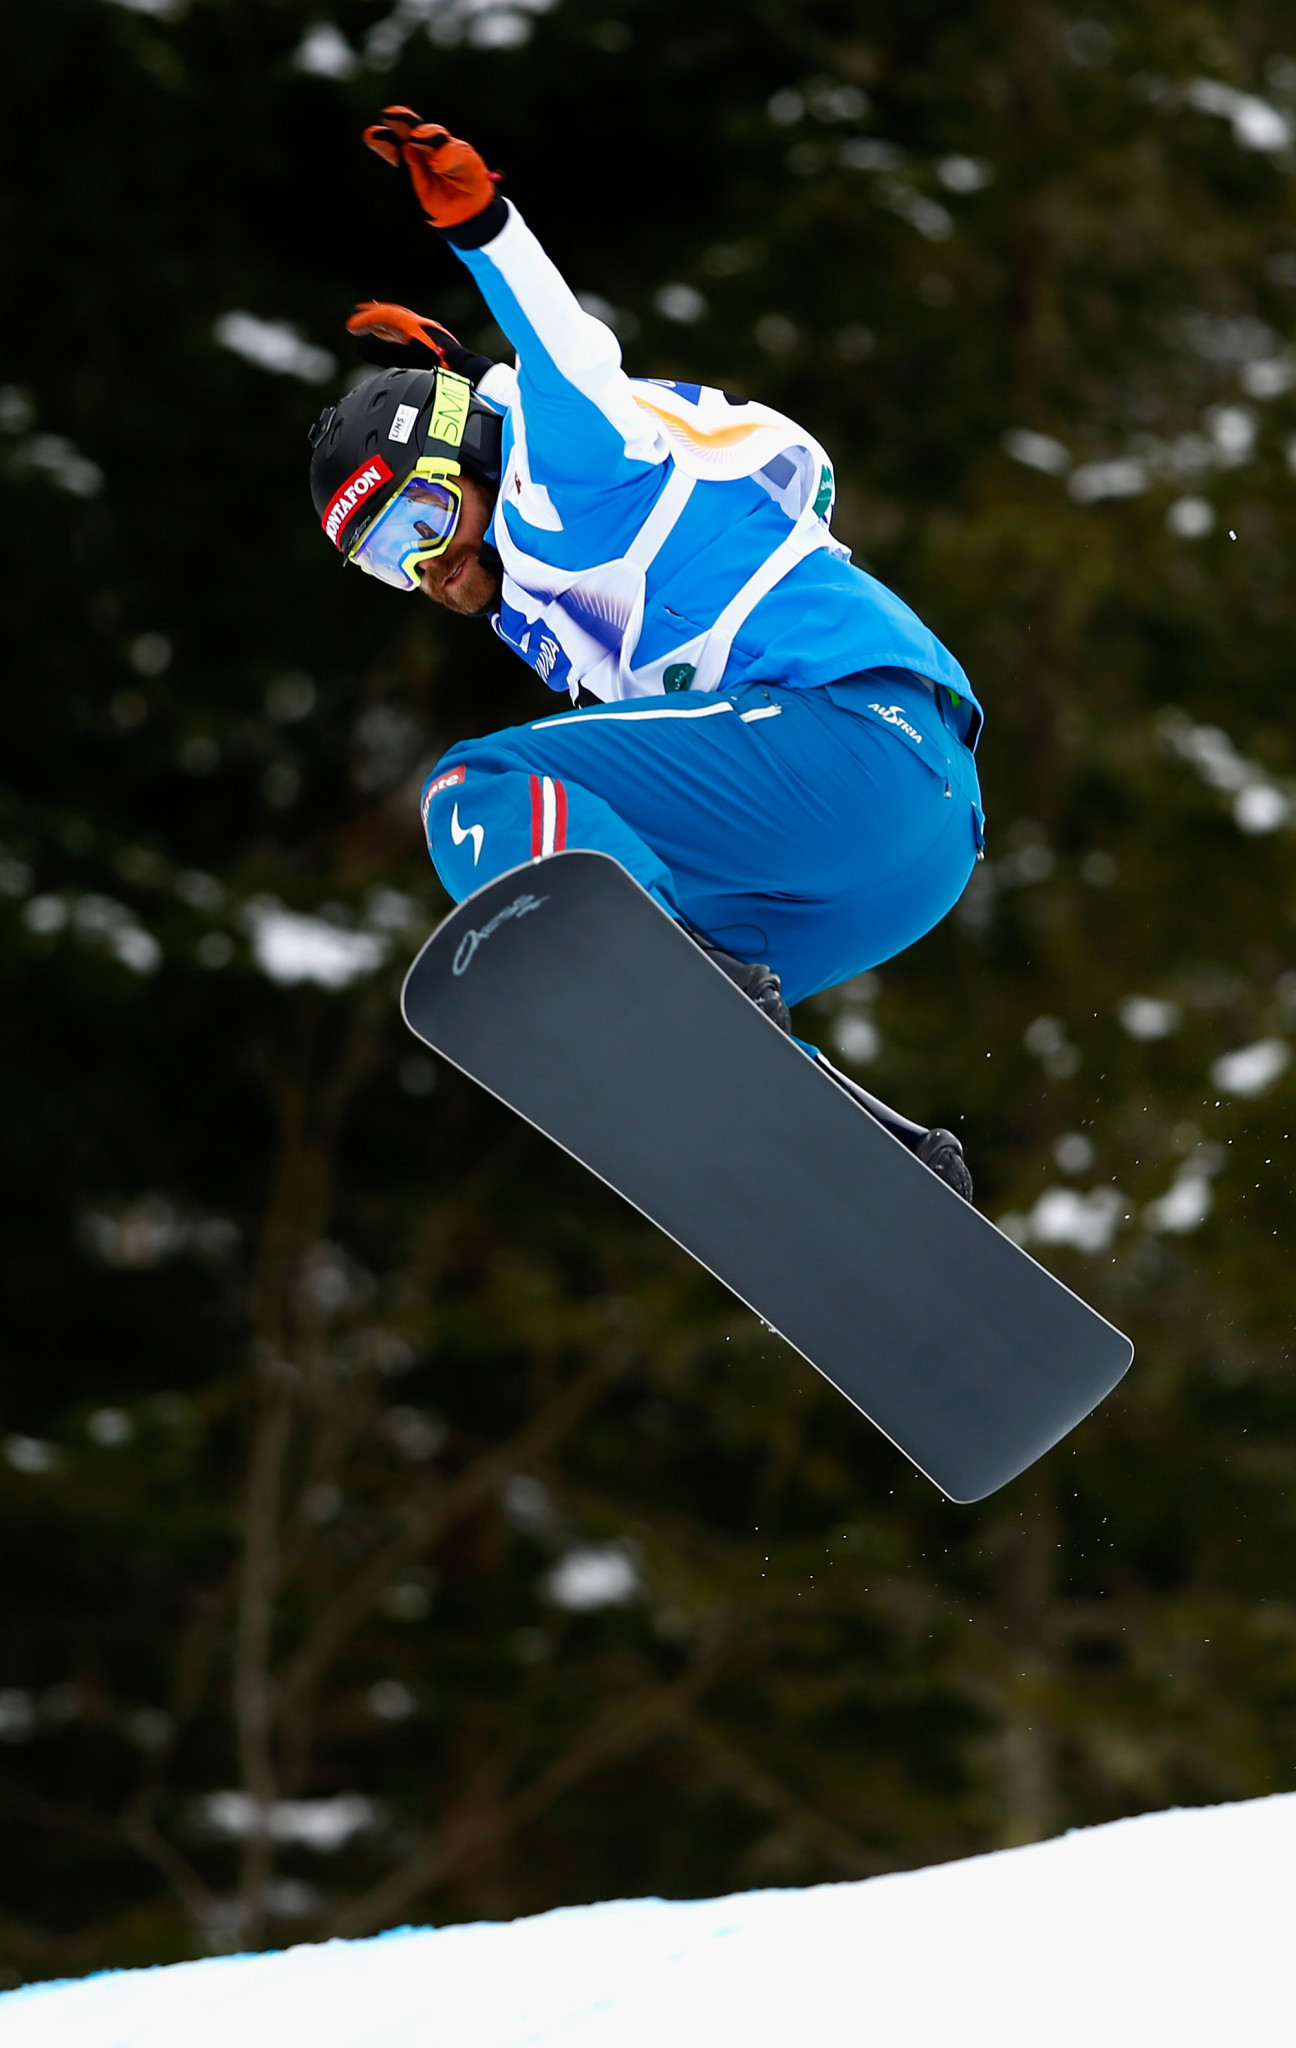 Markus Schairer won the world snowboard cross title in 2009 ©Getty Images